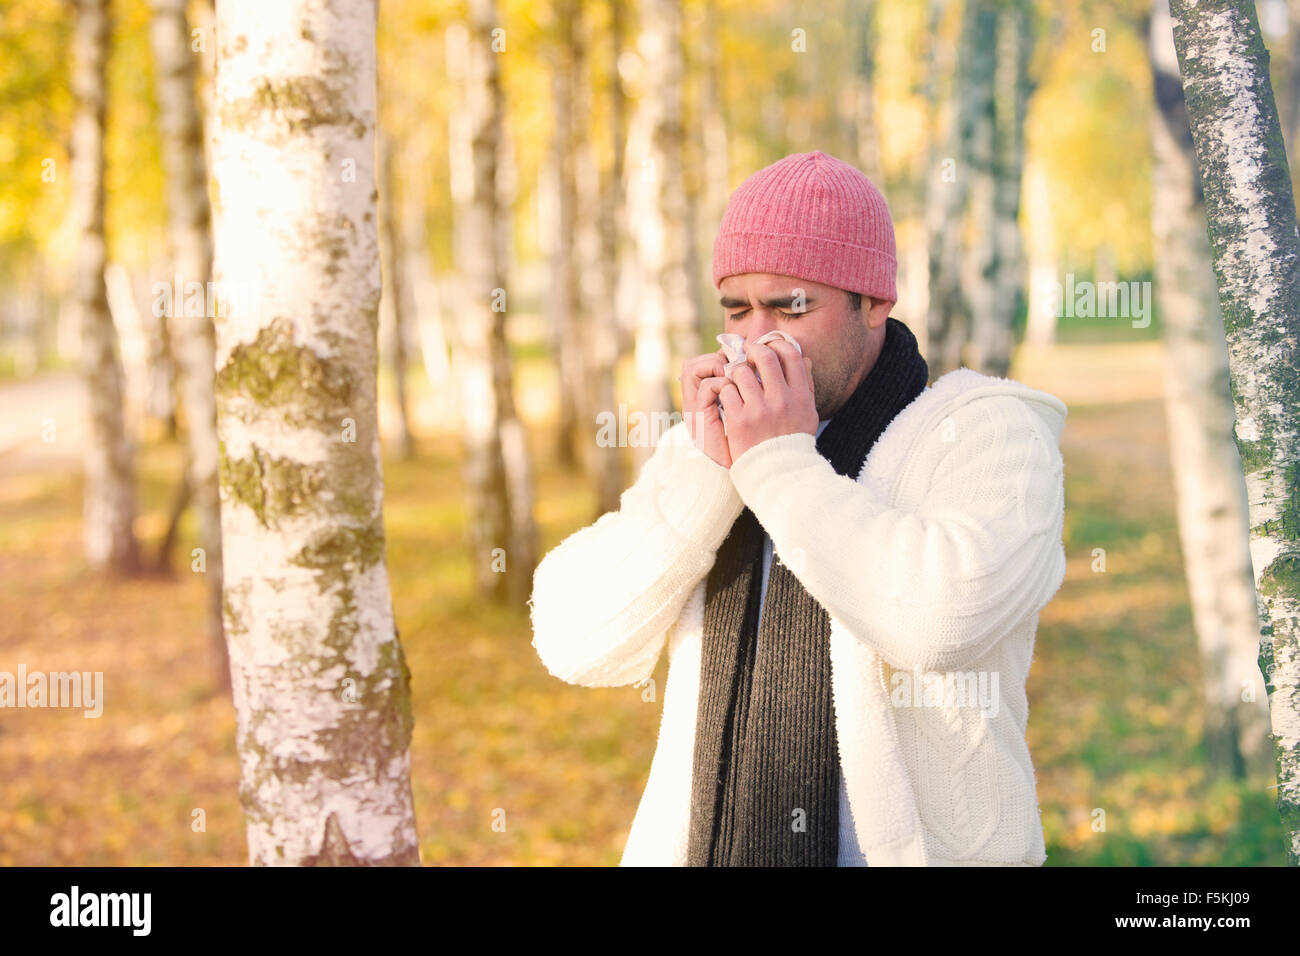 man standing by trees in fall and blowing his nose Stock Photo